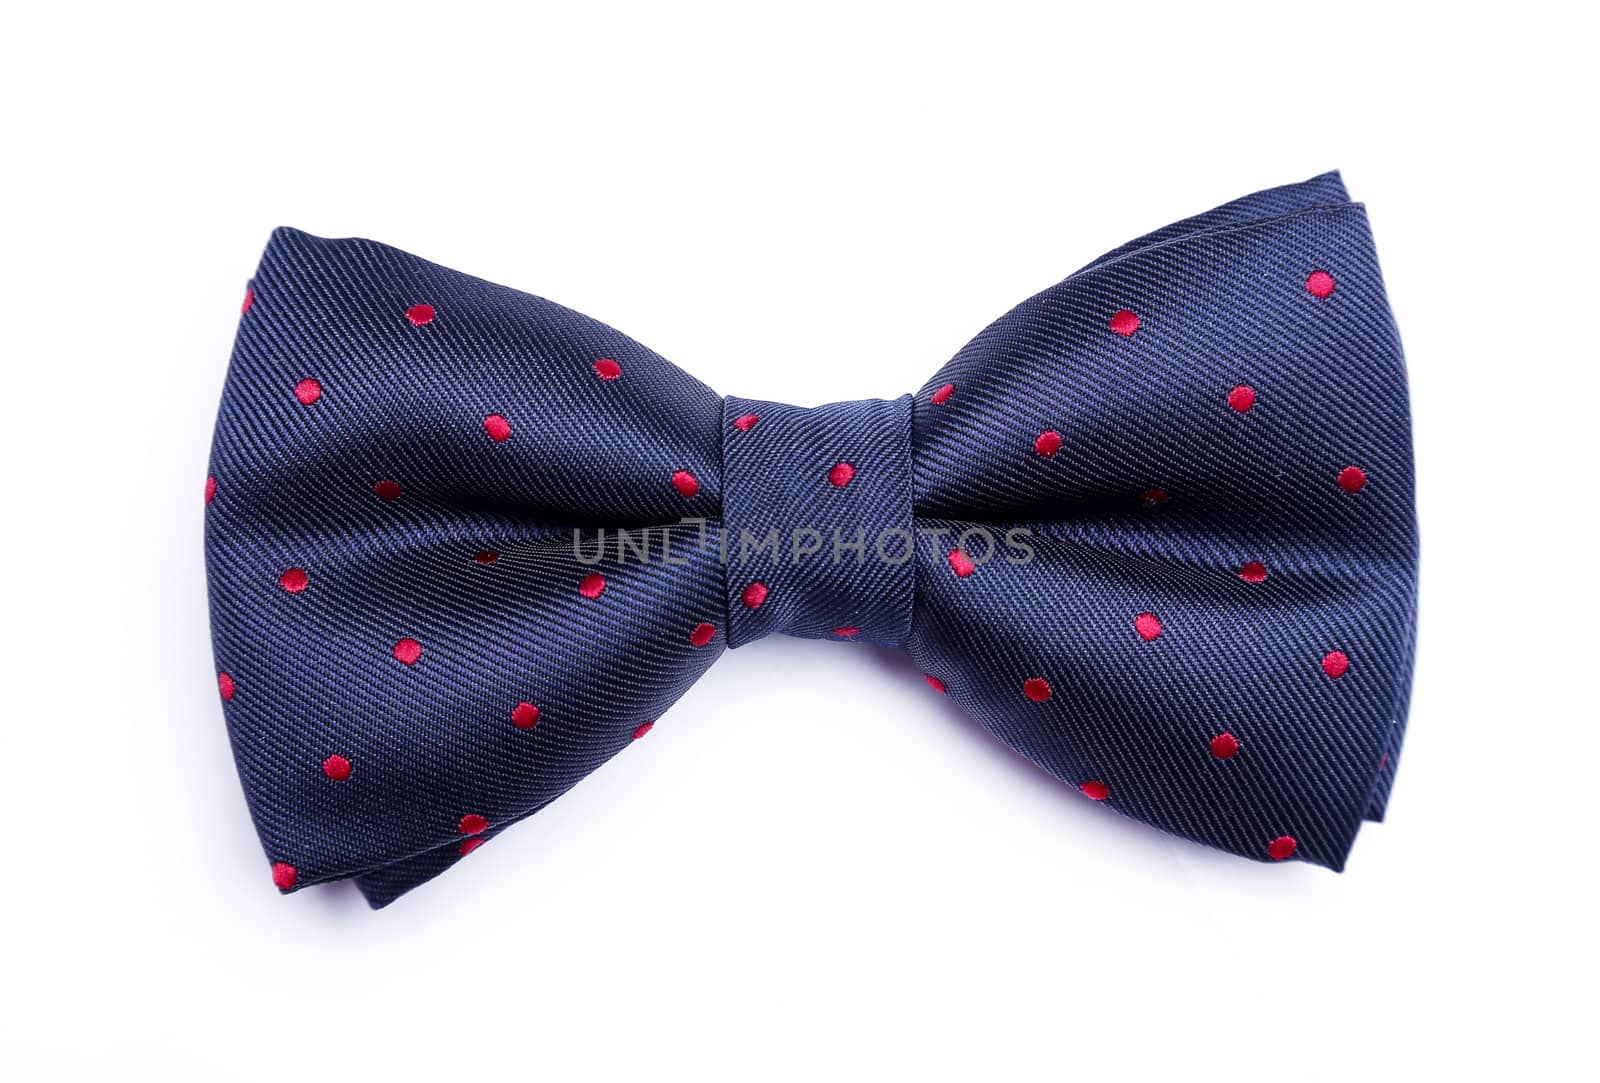 Bow tie on a white background